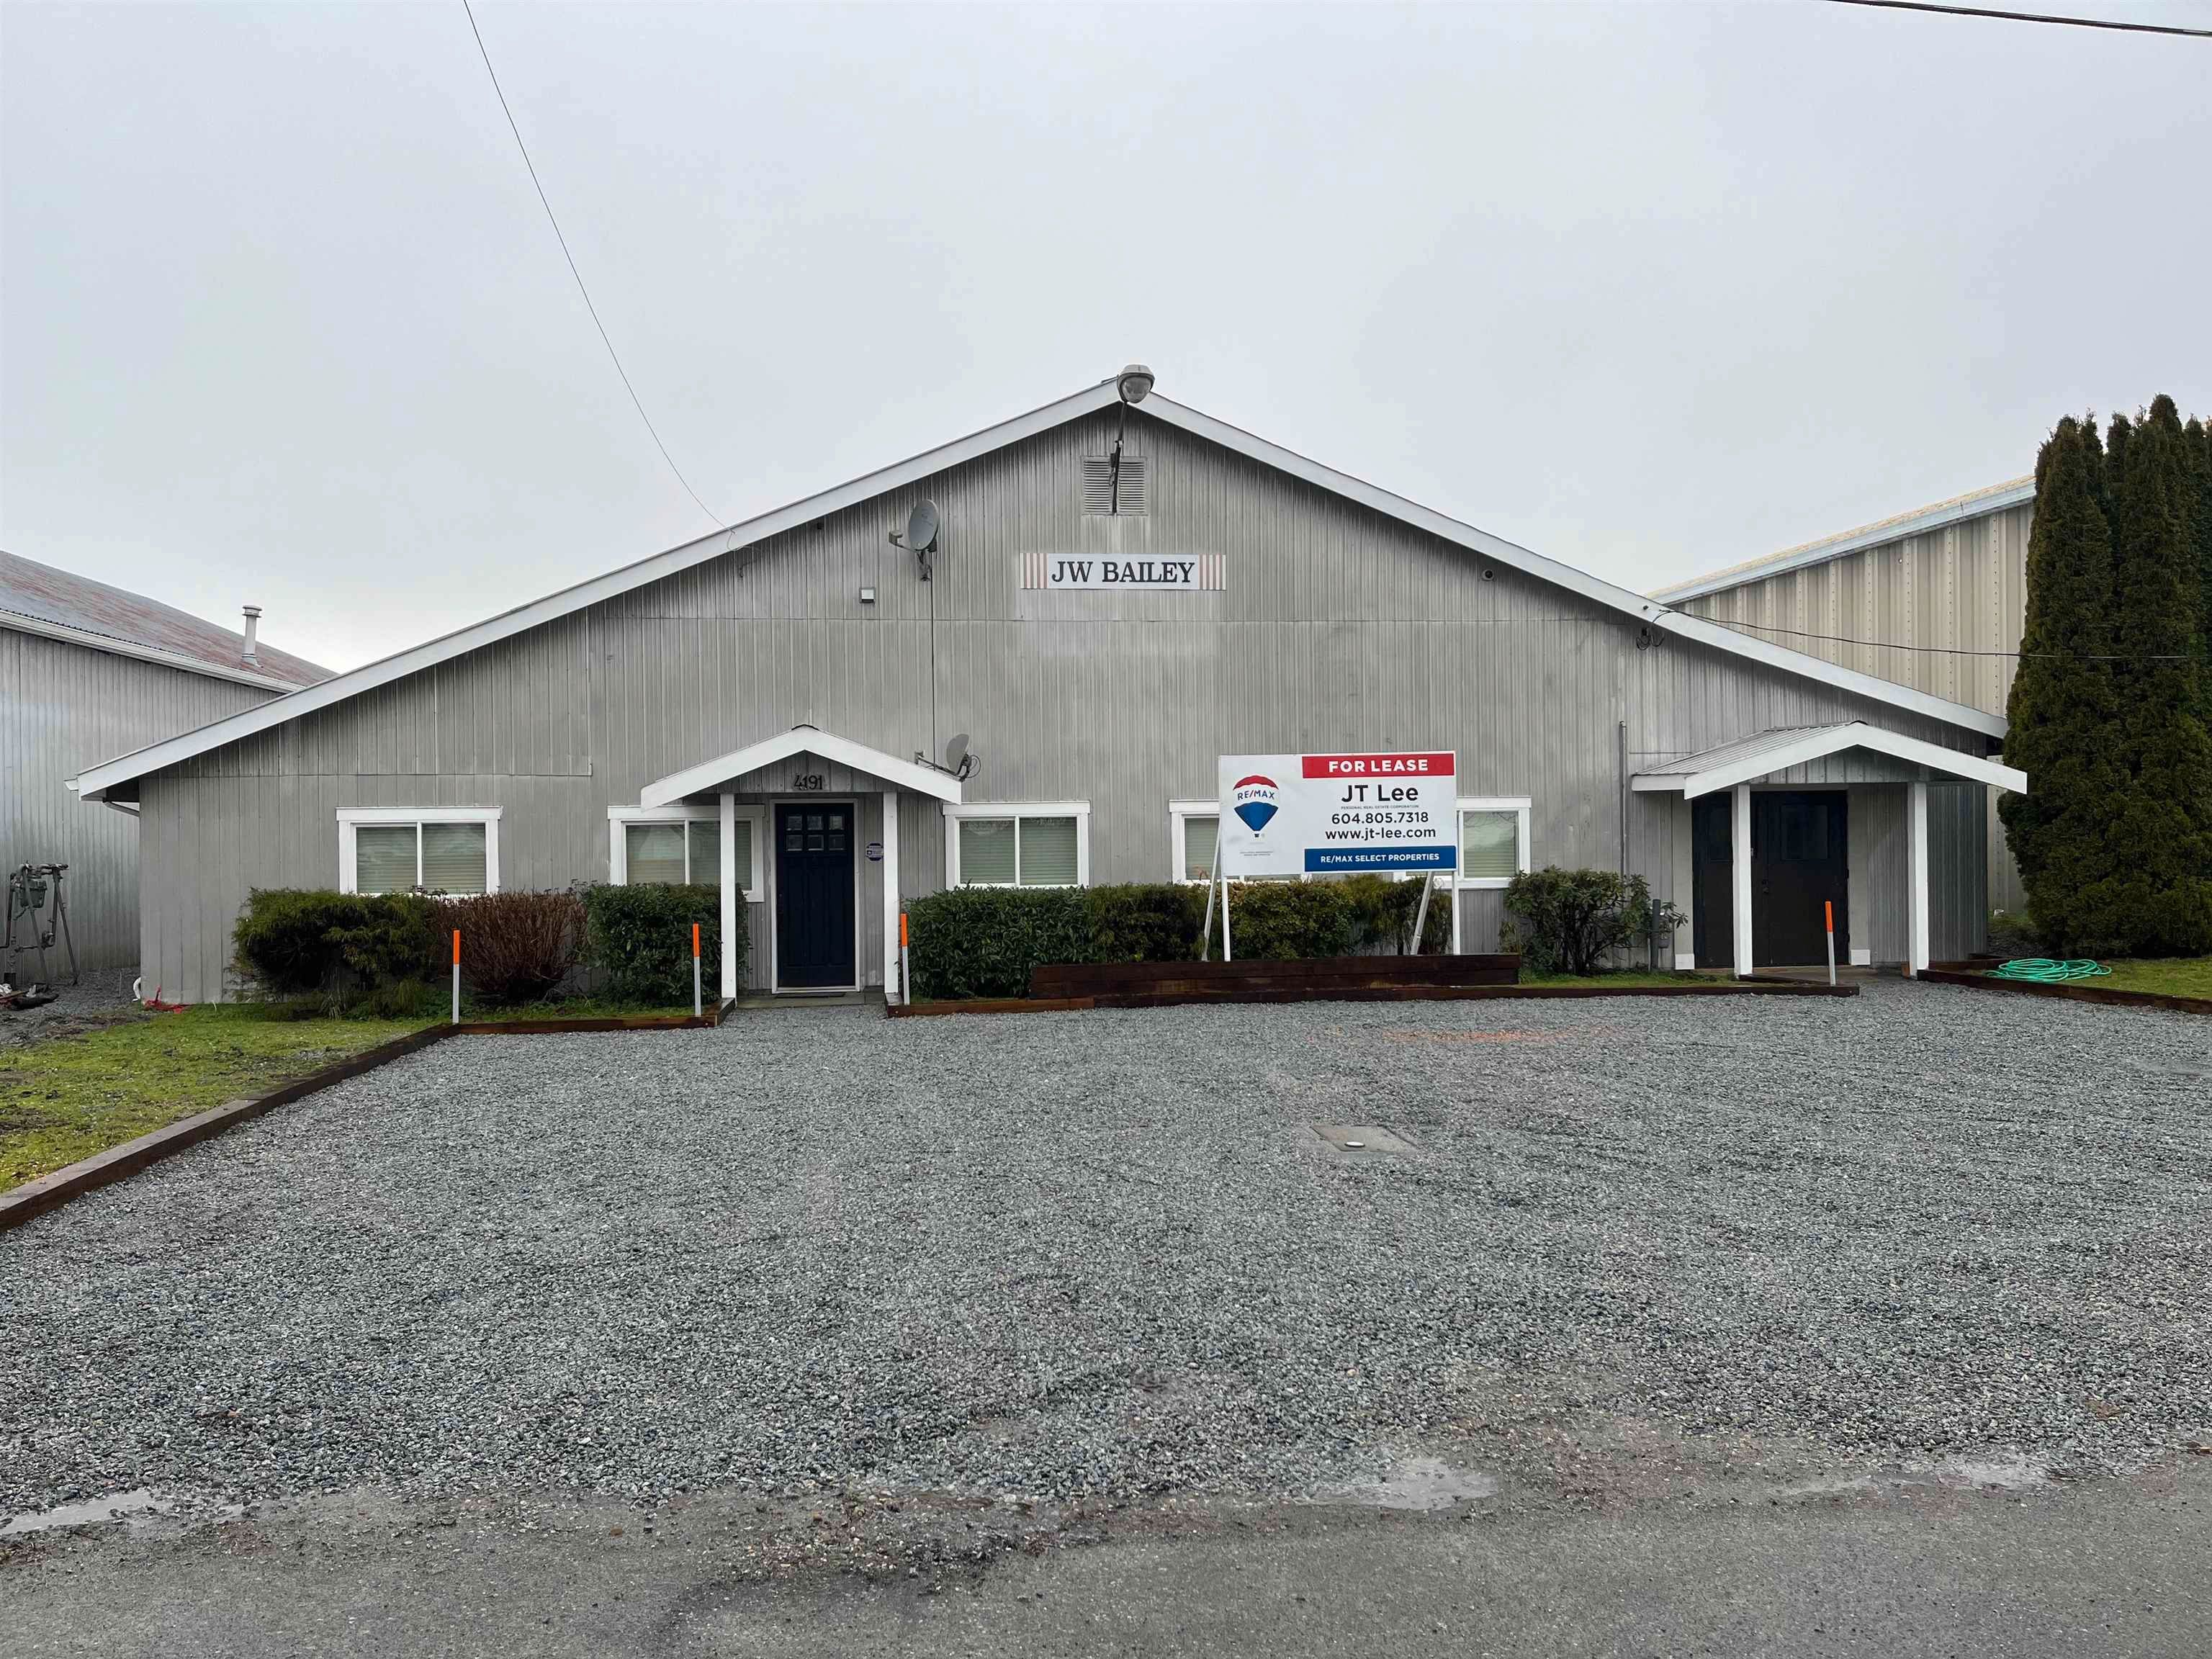 Main Photo: 4191 104 Street in Delta: East Delta Industrial for lease (Ladner)  : MLS®# C8055951